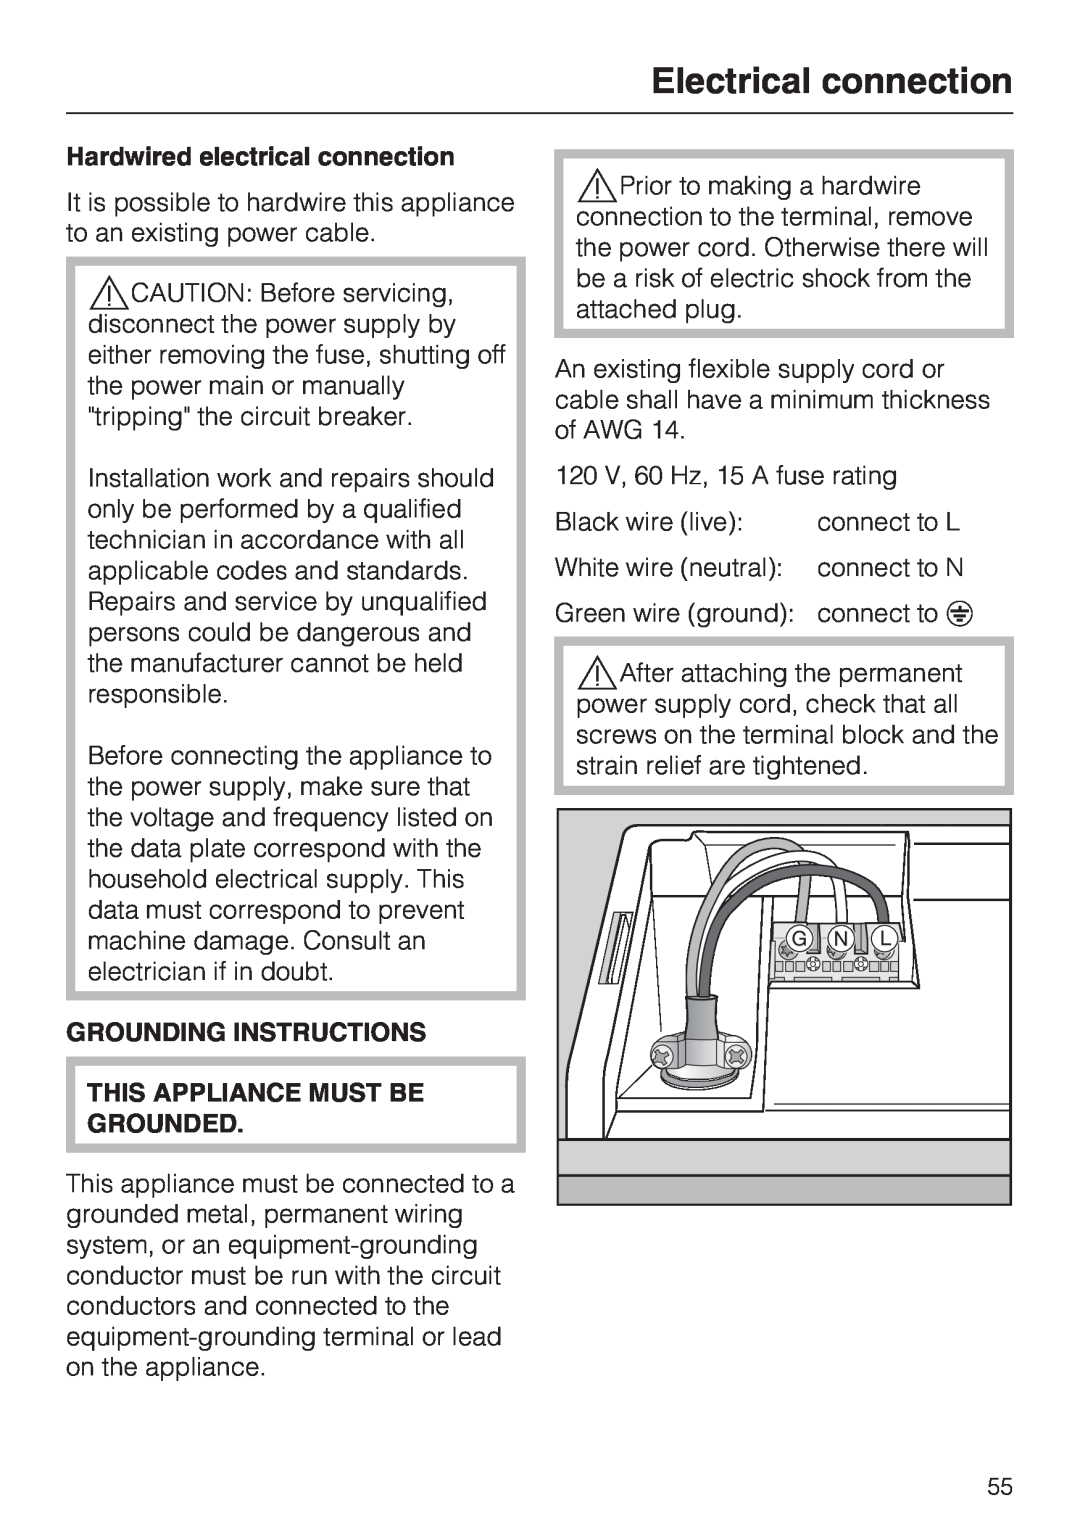 Miele G 4220, G 4225 manual Electrical connection, Hardwired electrical connection, Grounding Instructions 